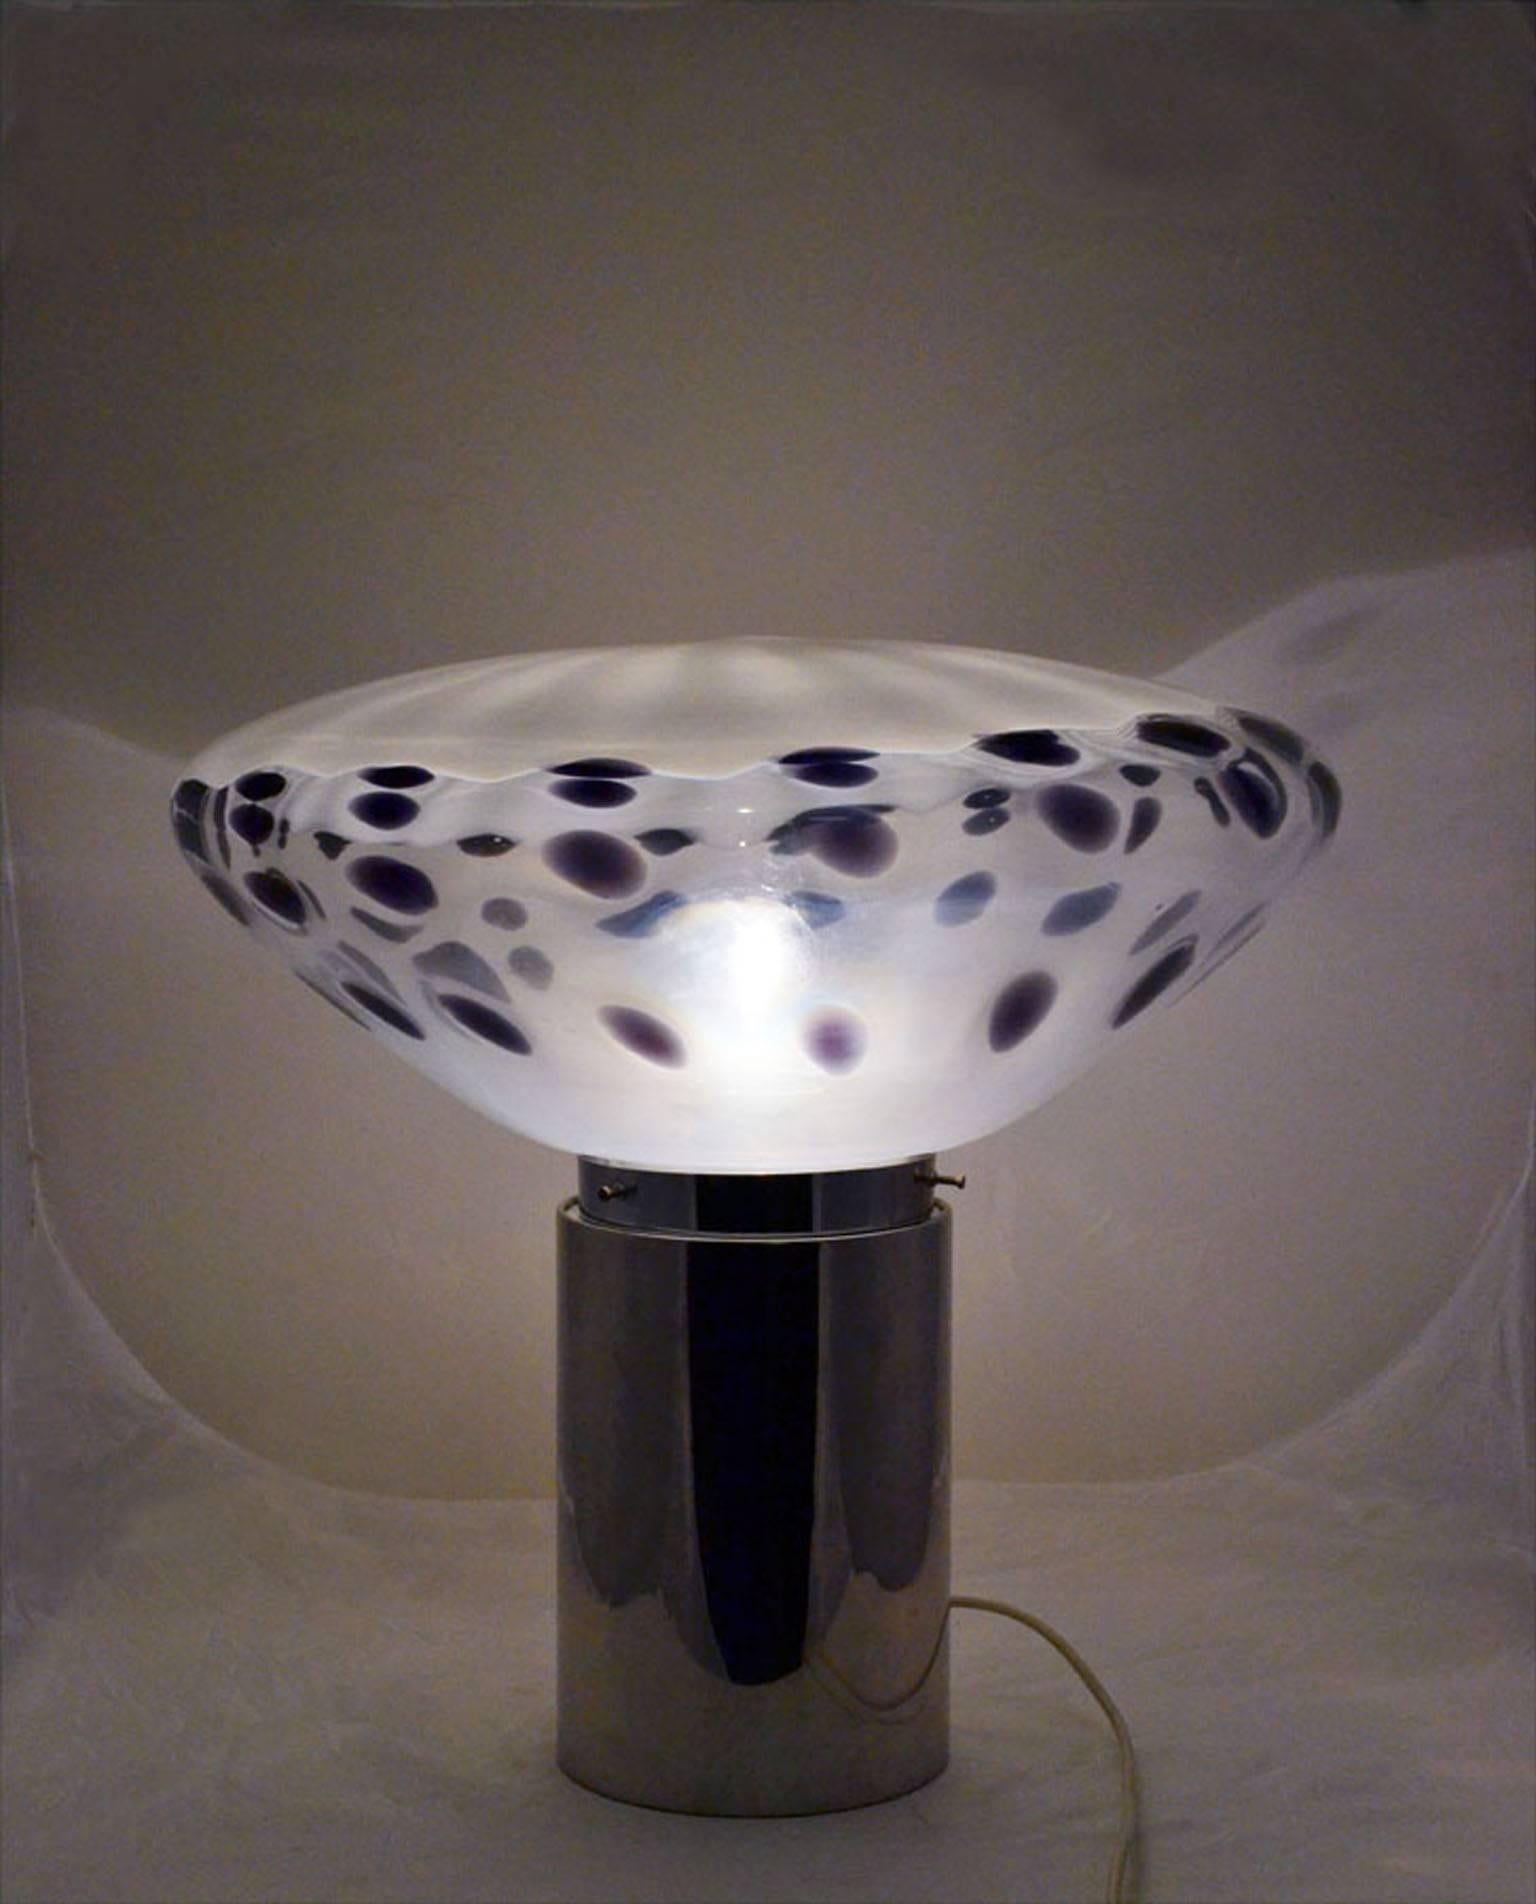 Table lamp prod. Murano, 1970s.
Cylinrical base in chromed steel, lampshade in blown glass with murrine.